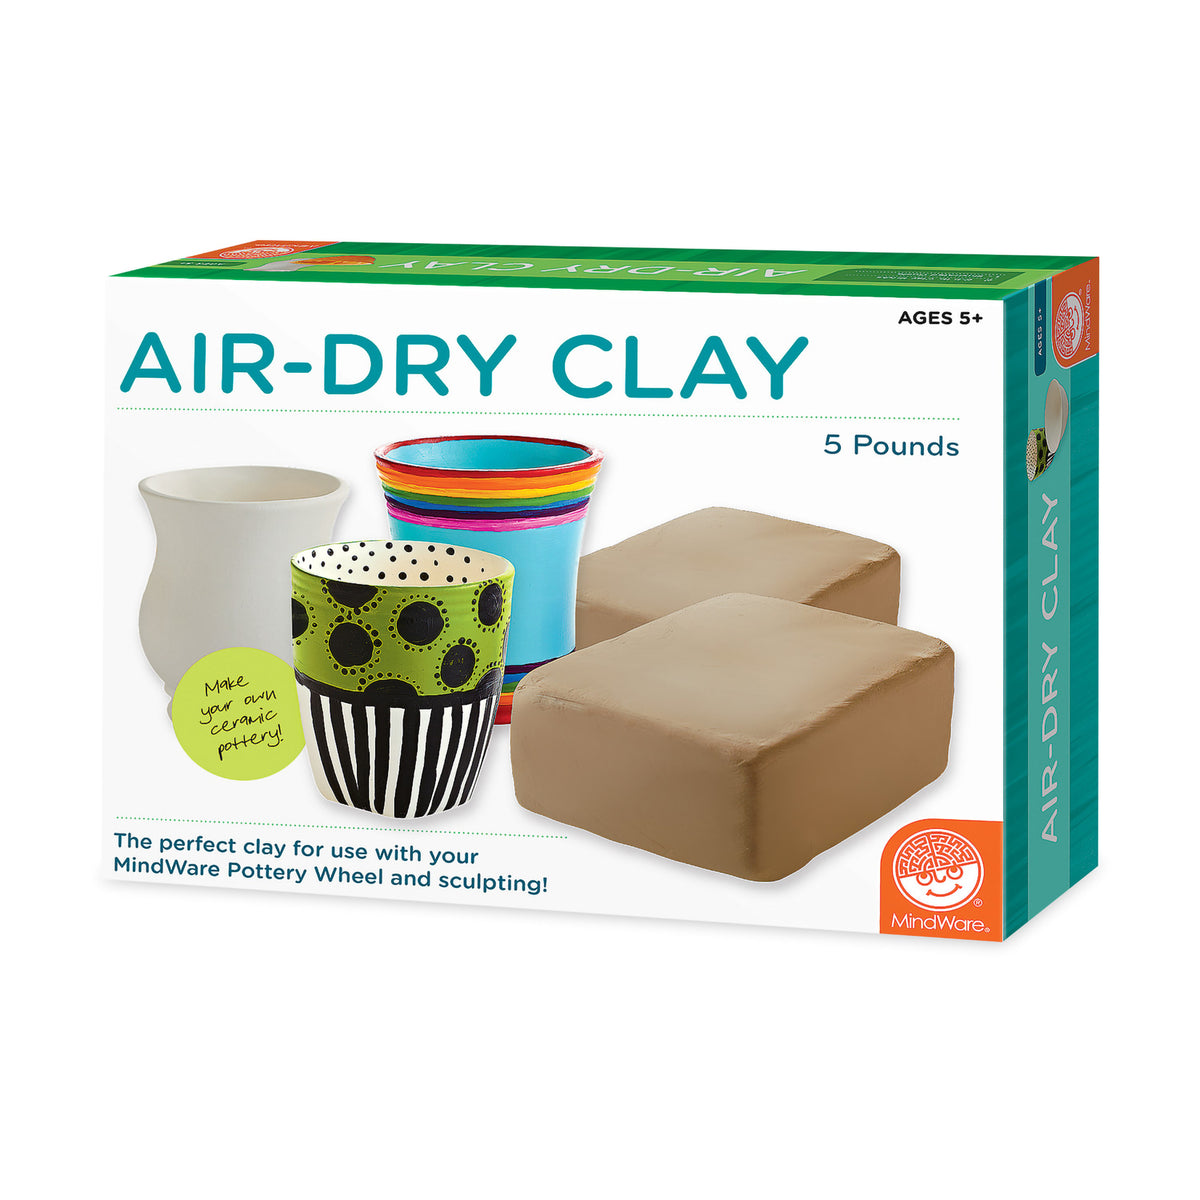 Creatibles D.I.Y. Air Dry Clay Kit - Set of 24 Colors - OOLY